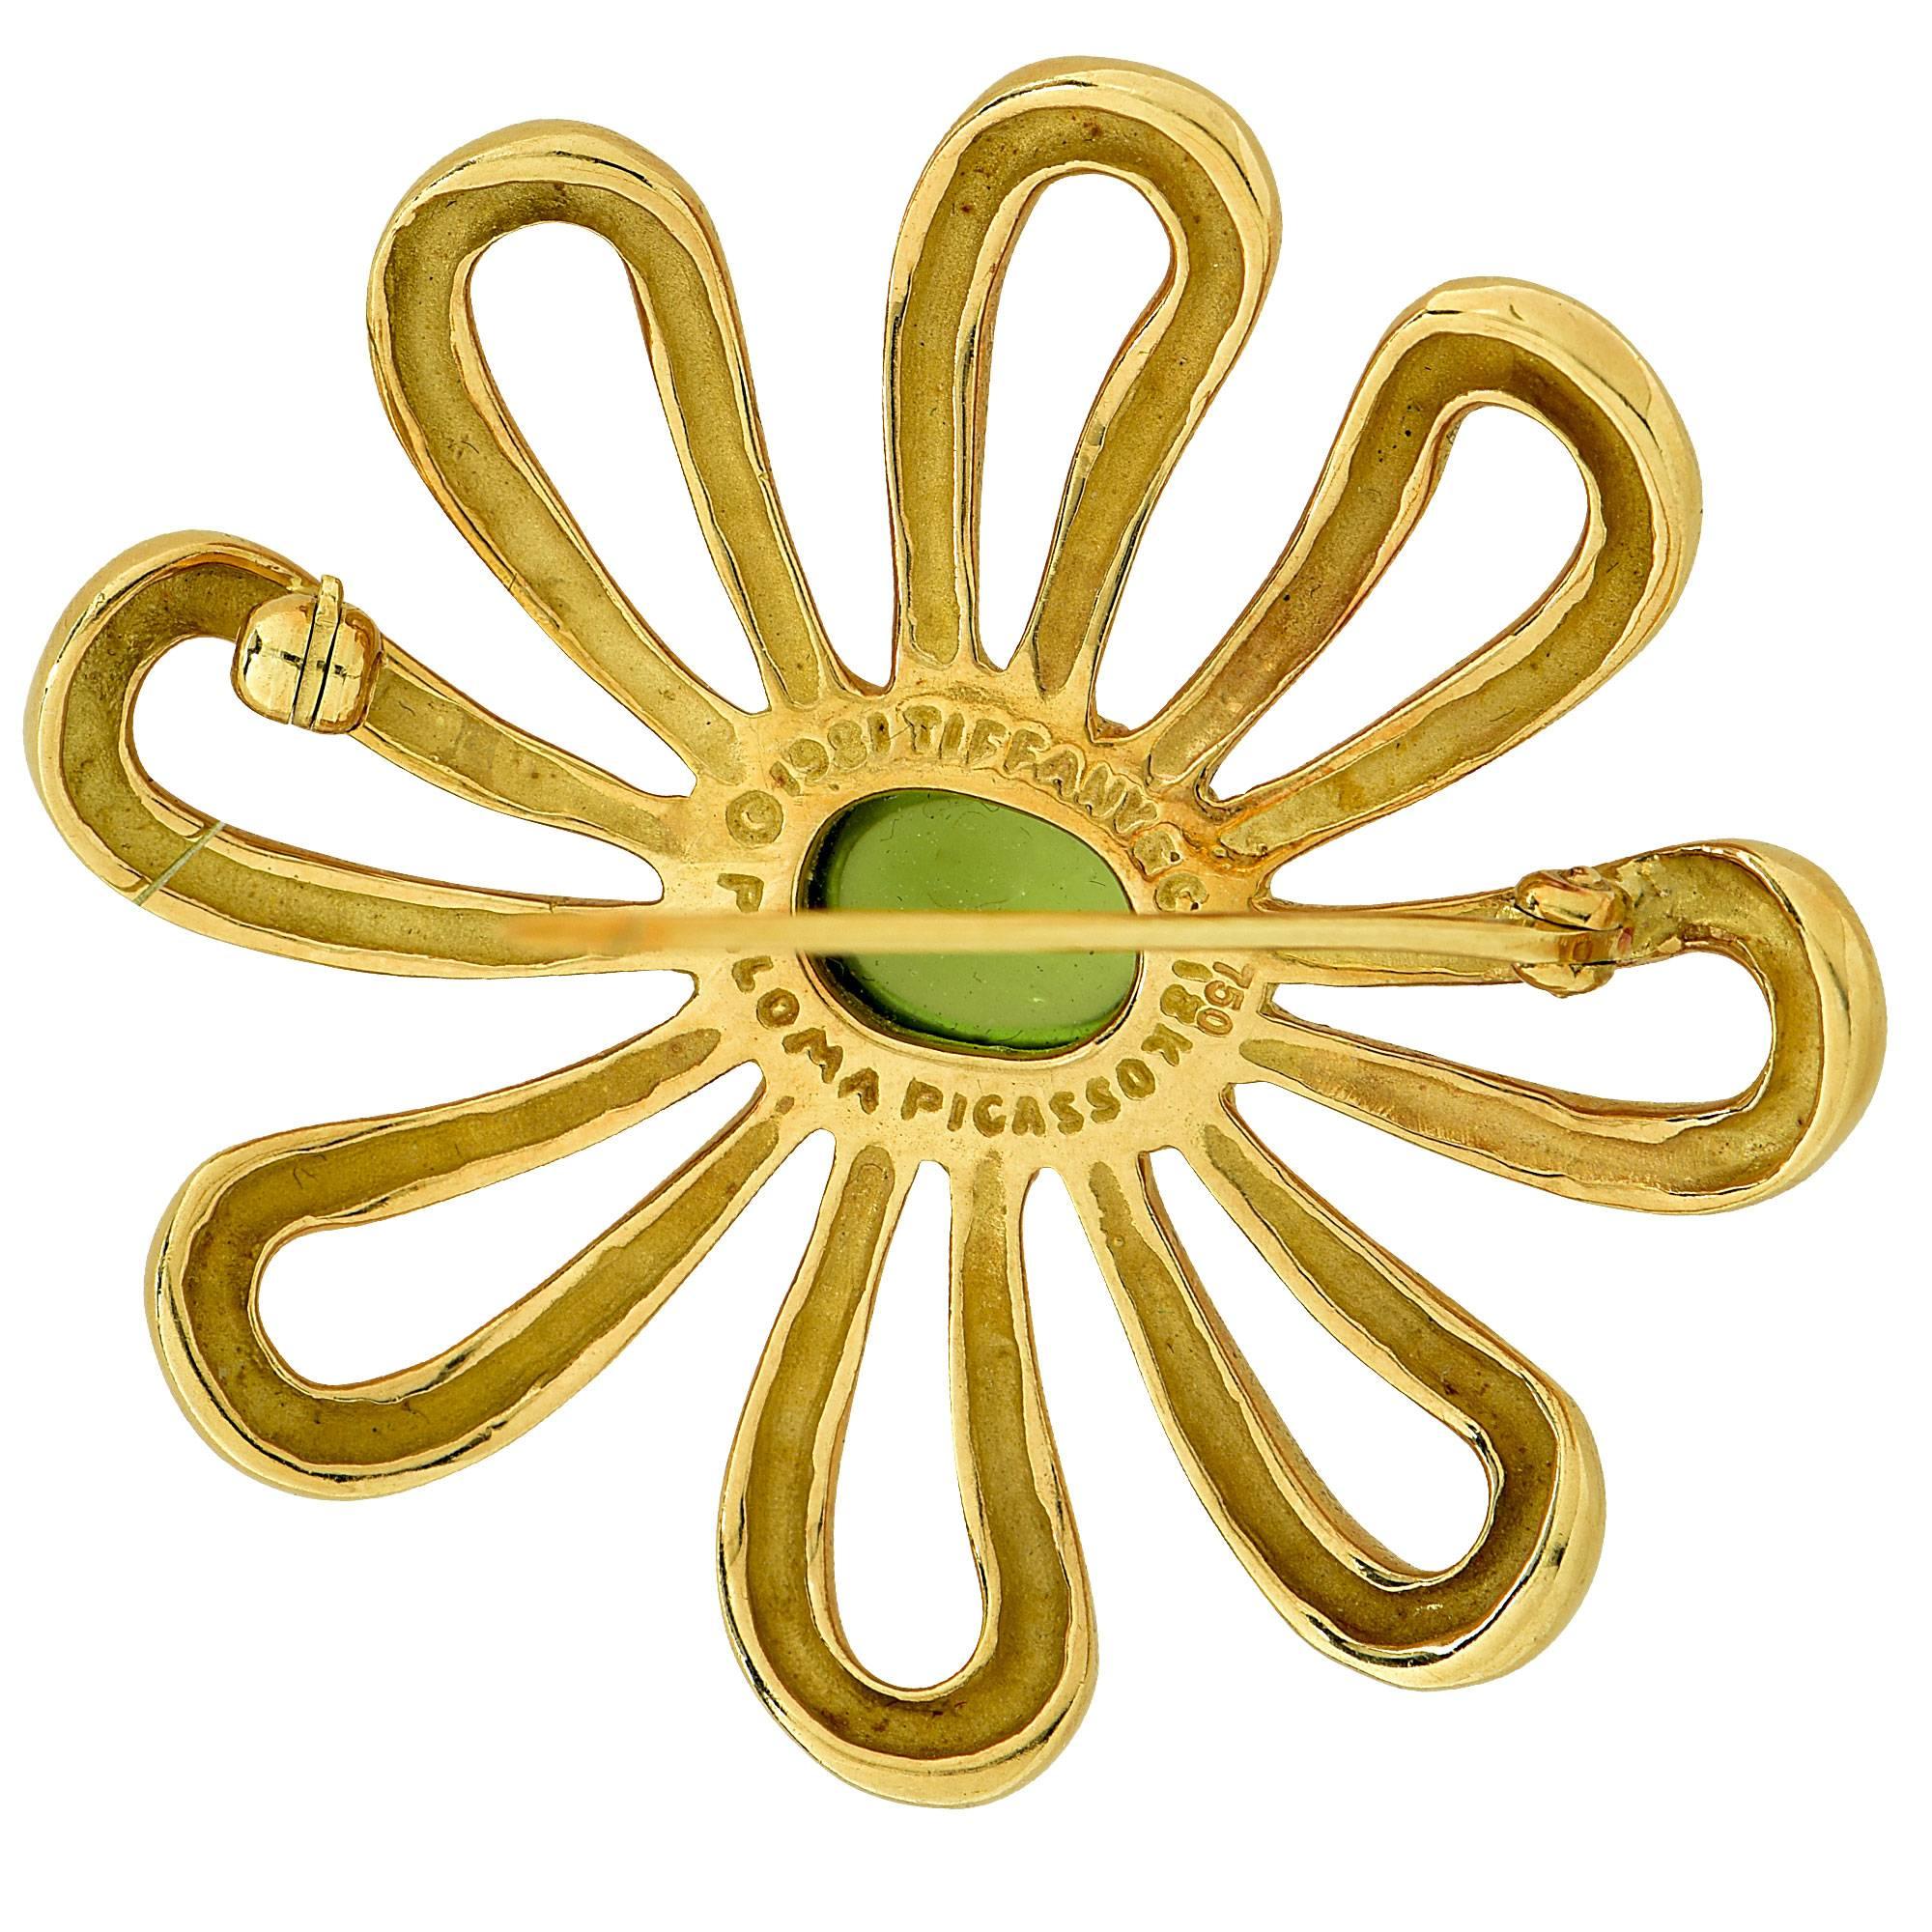 18k yellow gold Tiffany & Co. Paloma Picasso brooch featuring a peridot cabochon weighing approximately 3cts.

The brooch measures 1.54 inches in height by 1.65 inches in width by .36 inch in depth.
It is stamped and tested as 18k gold.
The